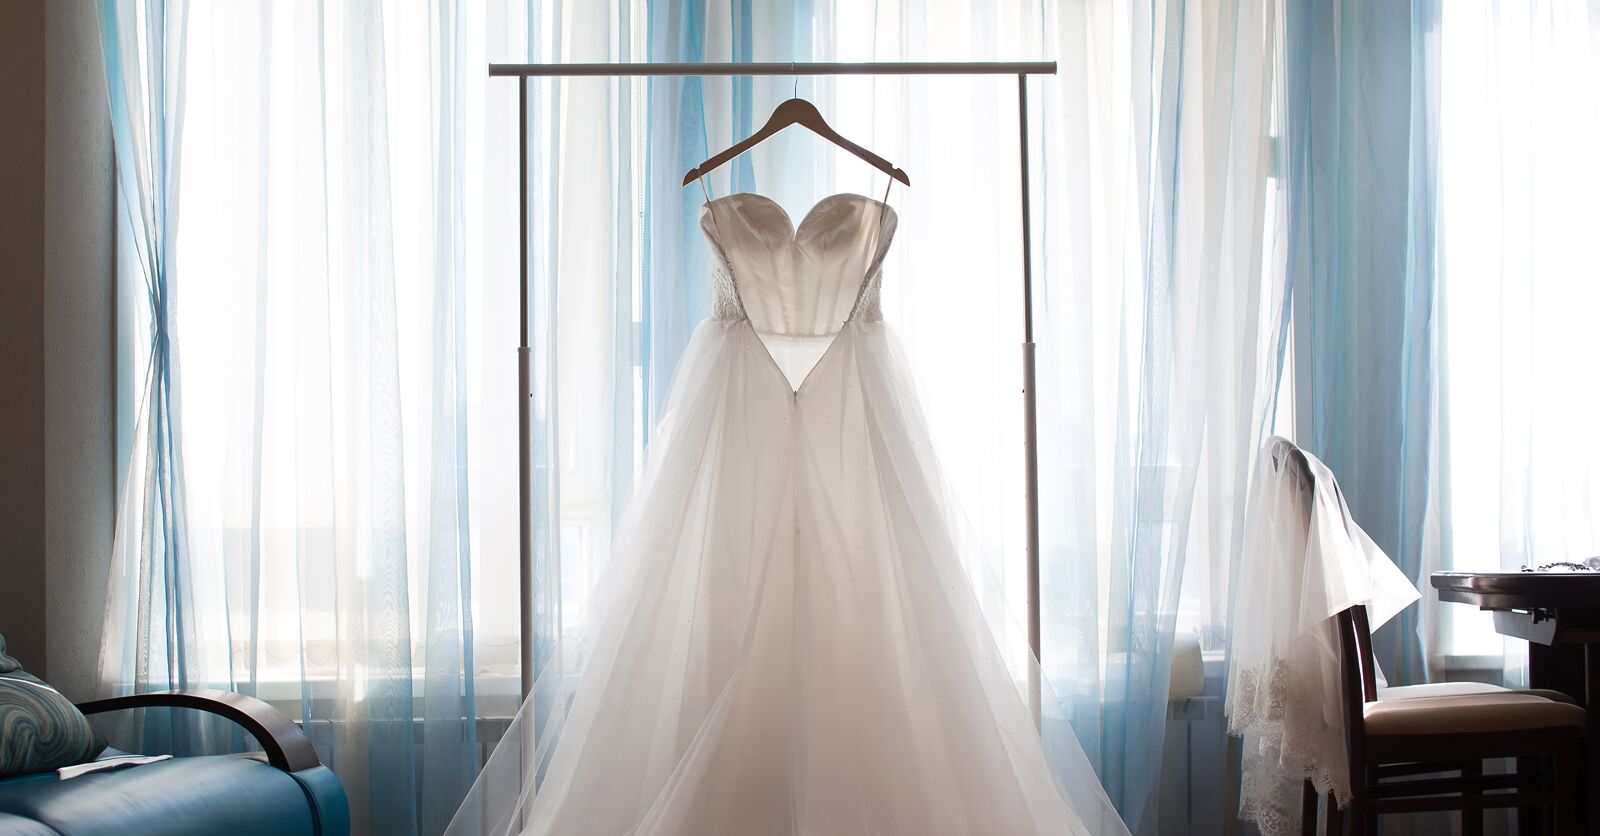 How To Store Wedding Dress After Wedding